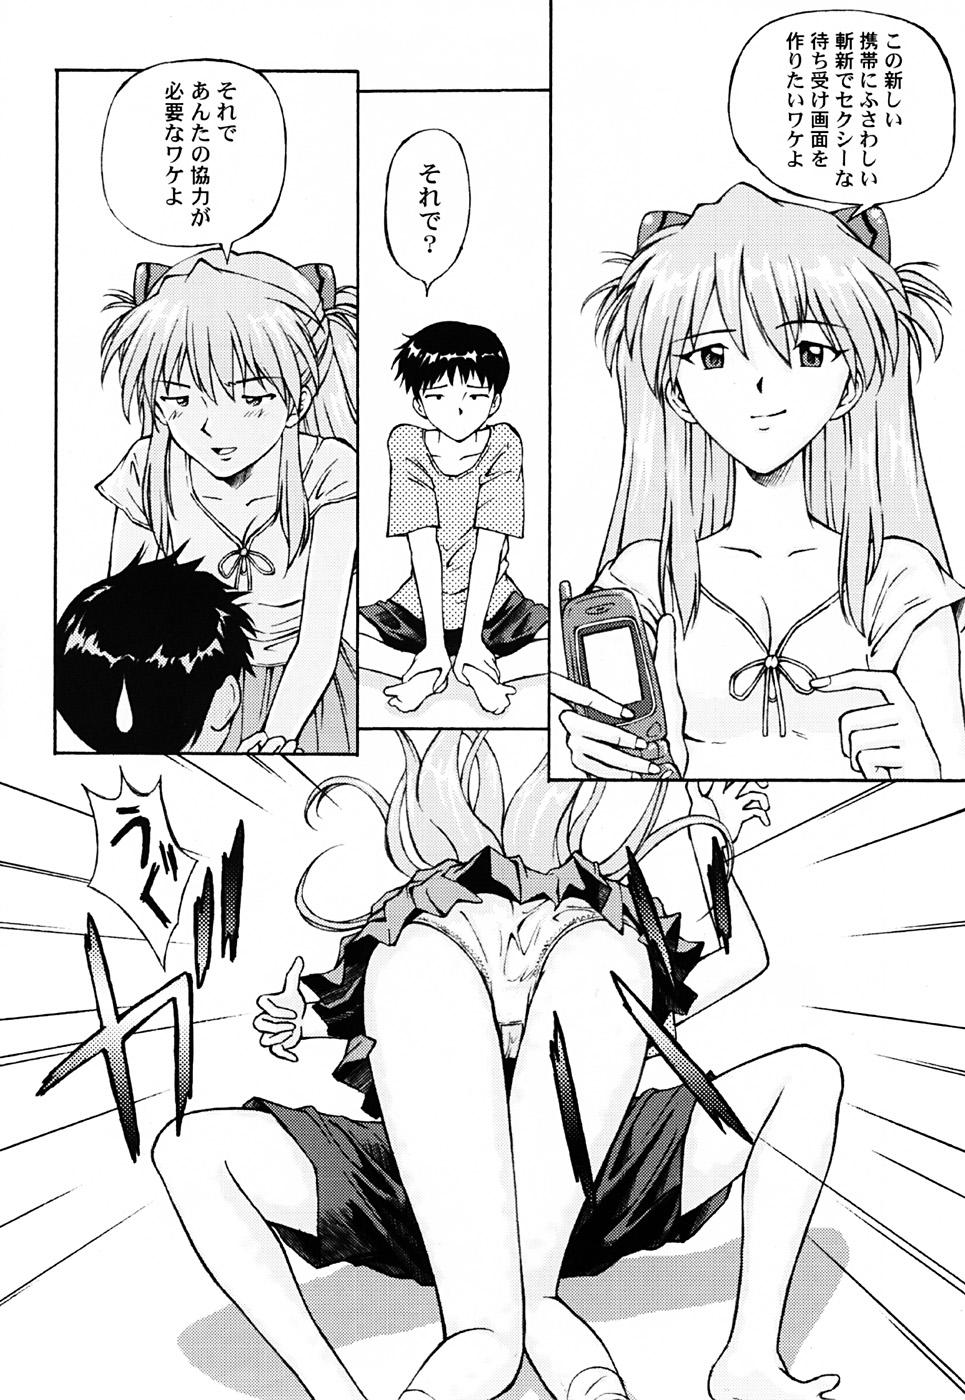 Pounded LOVE CASK - Neon genesis evangelion Beauty - Page 6